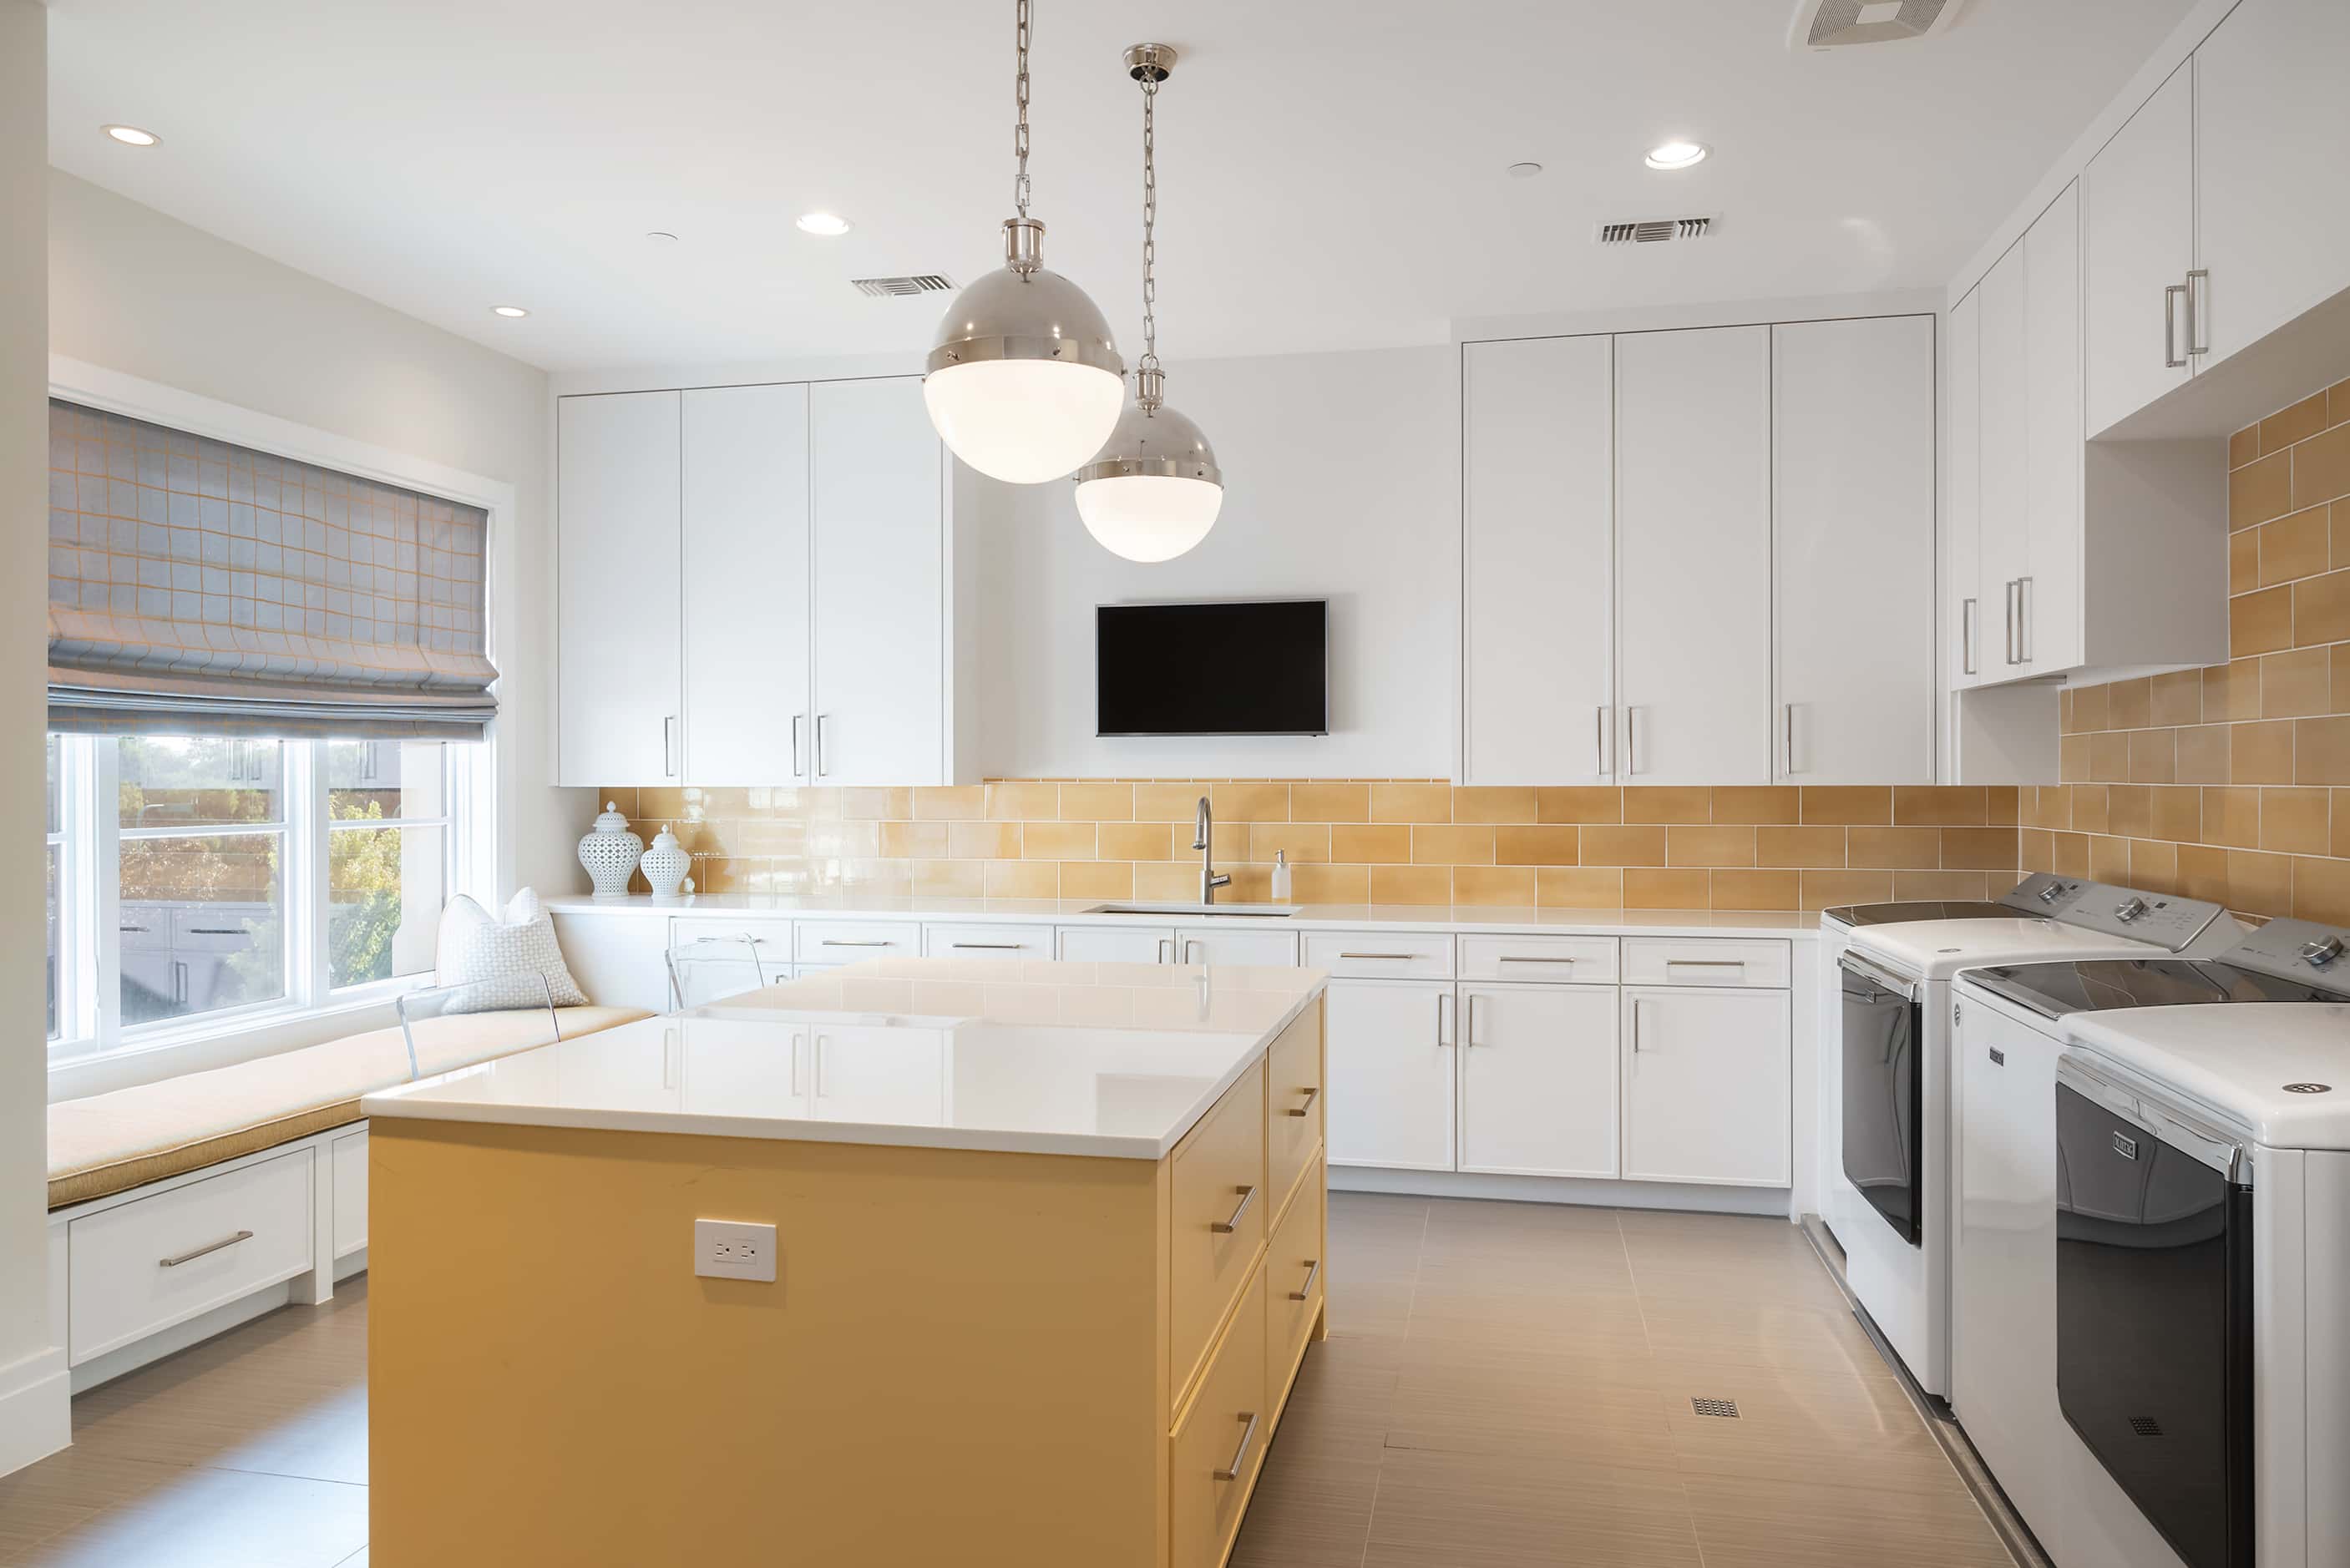 Laundry room with white appliances, white cabinets, a yellow backsplash and a yellow island.